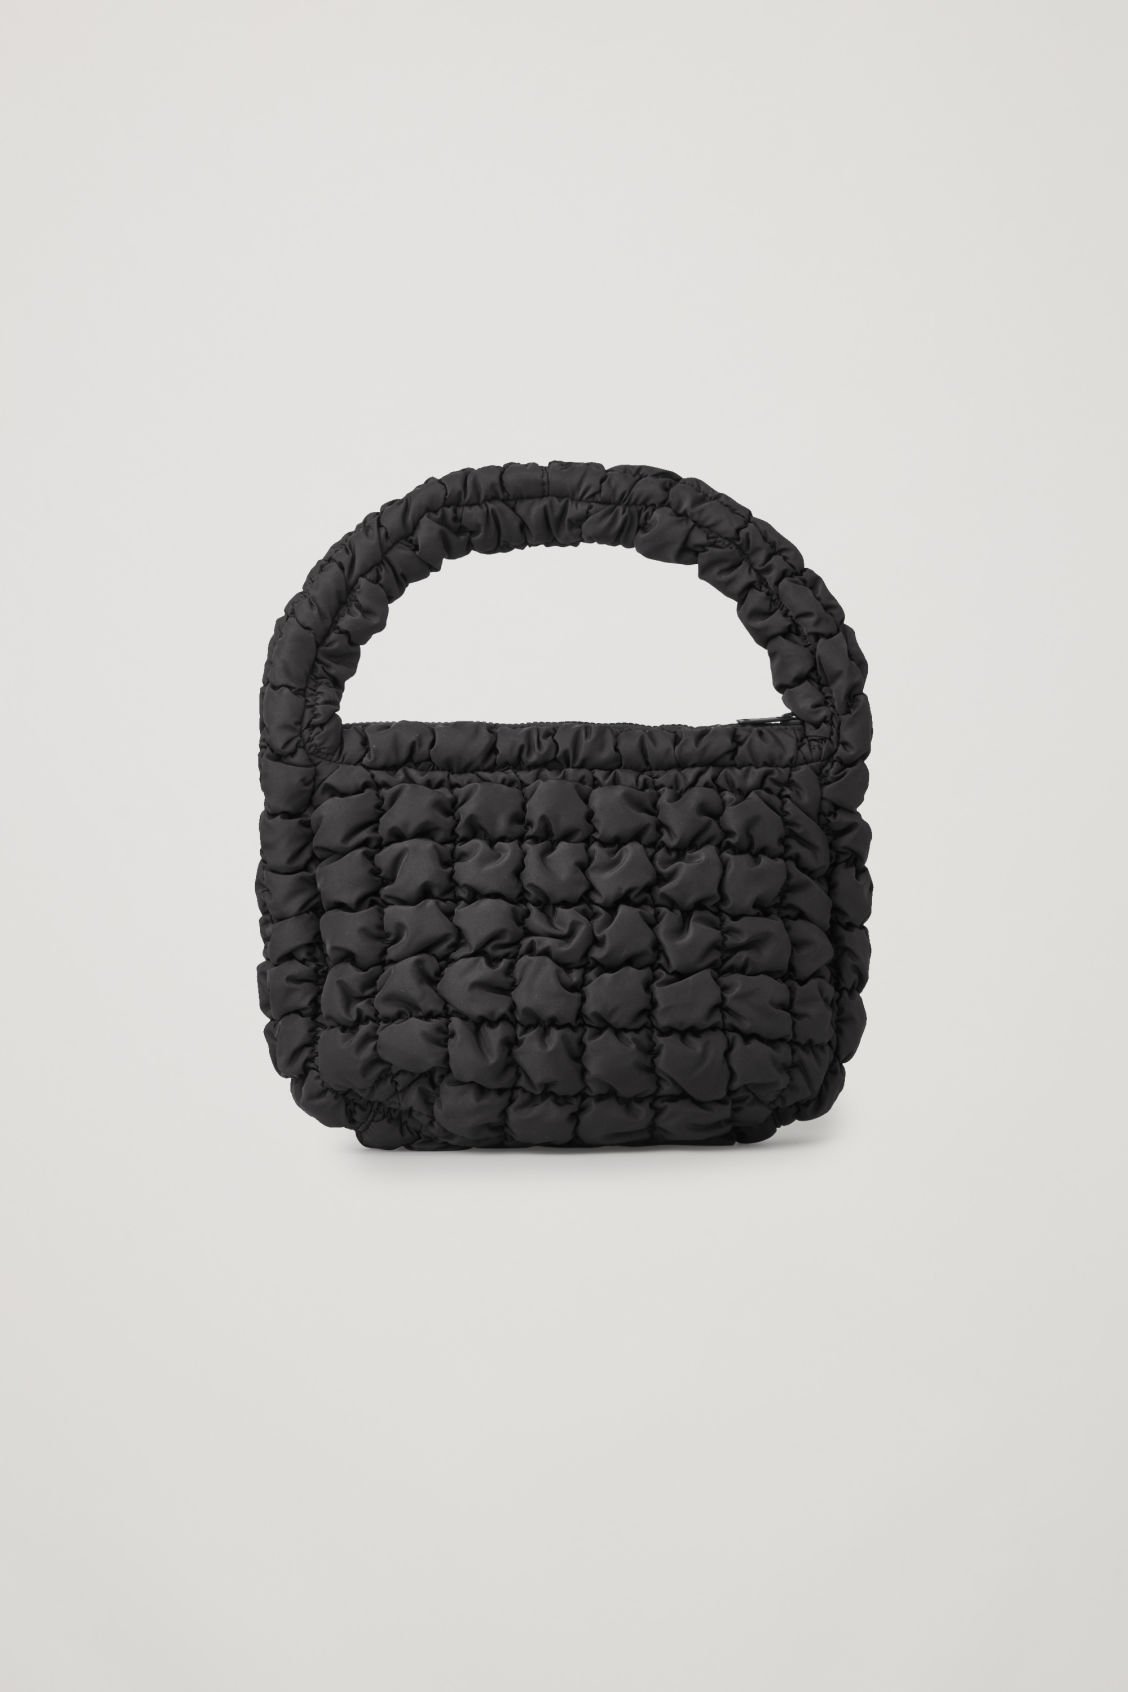 COS Quilted Mini Bag NWT Black